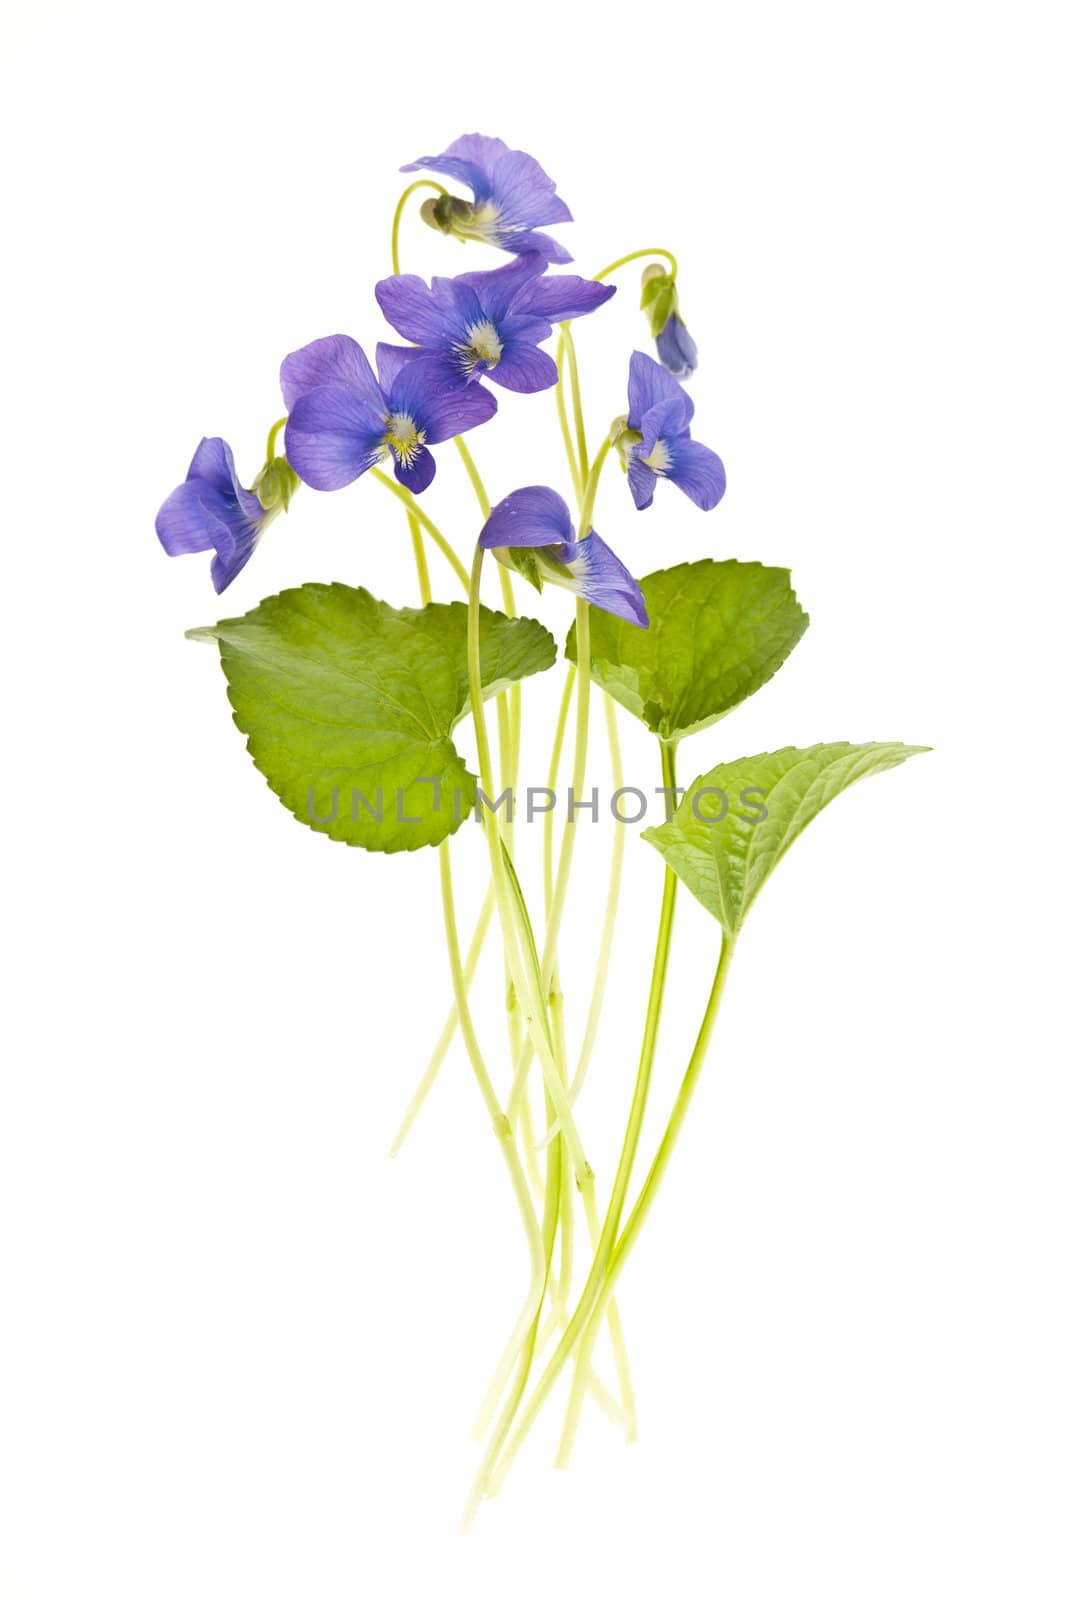 Arrangement of spring purple violets with leaves isolated on white background